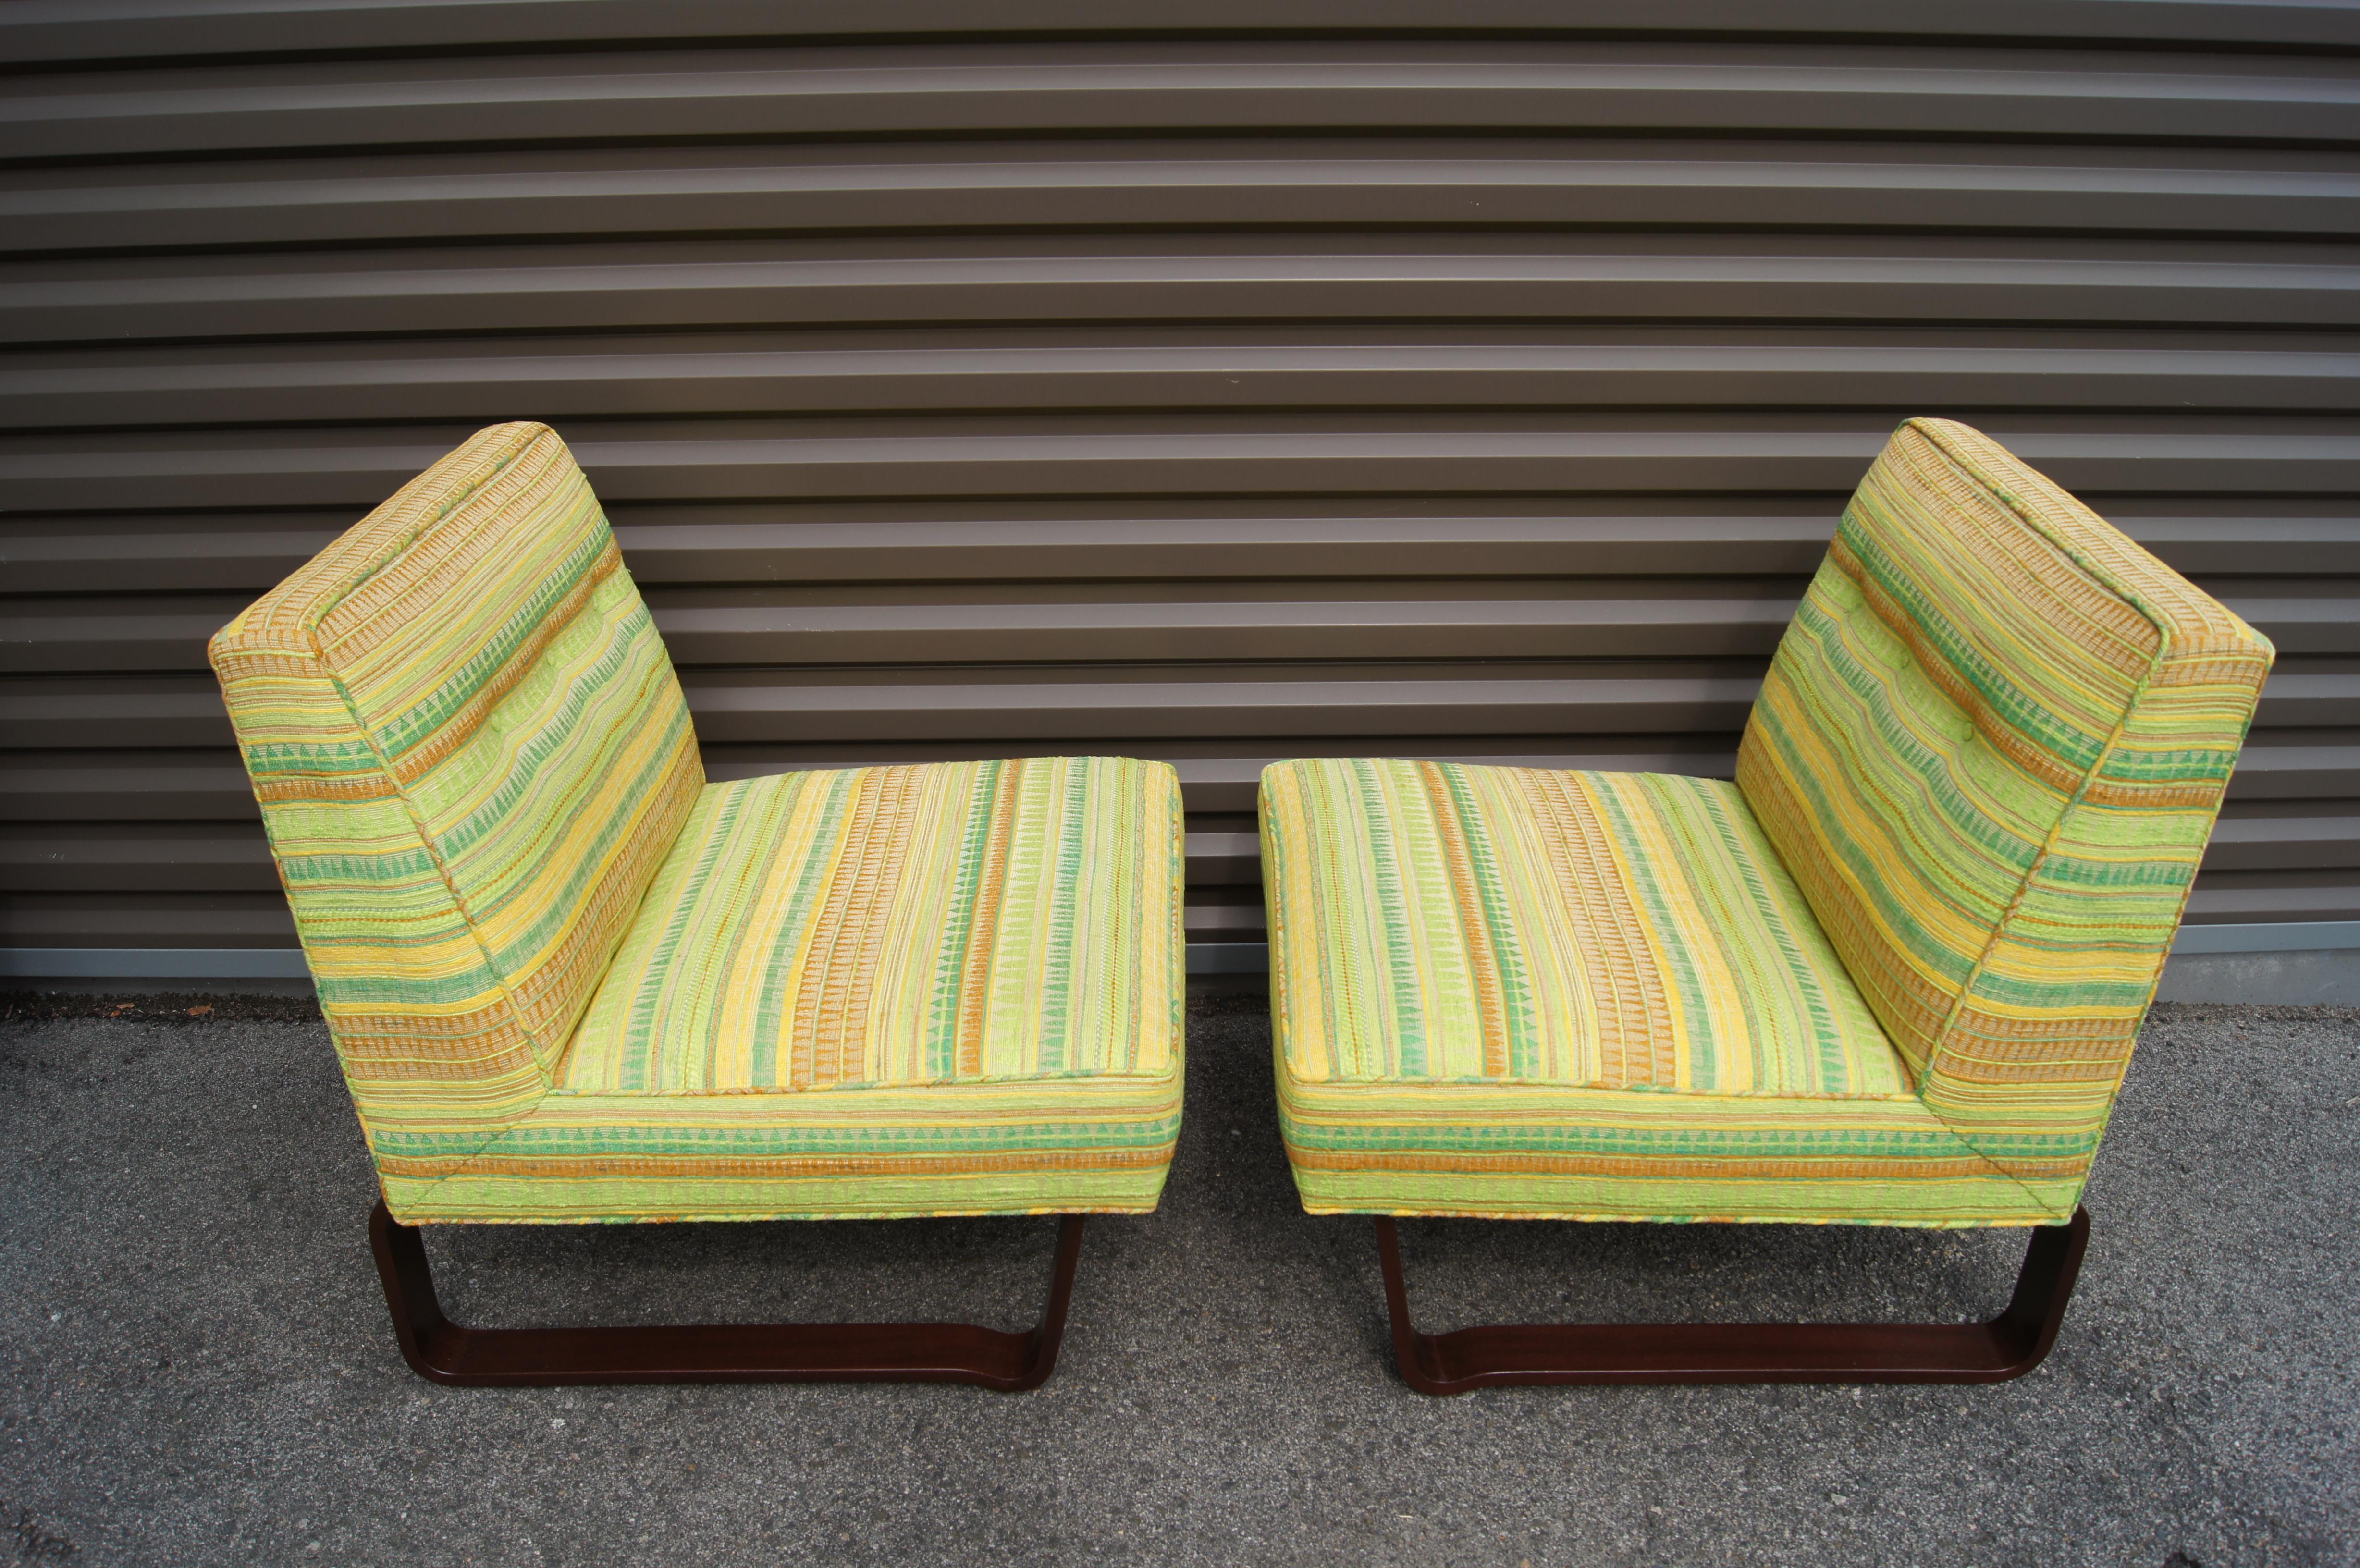 Mid-Century Modern Pair of Slipper Chairs by Edward Wormley for Dunbar